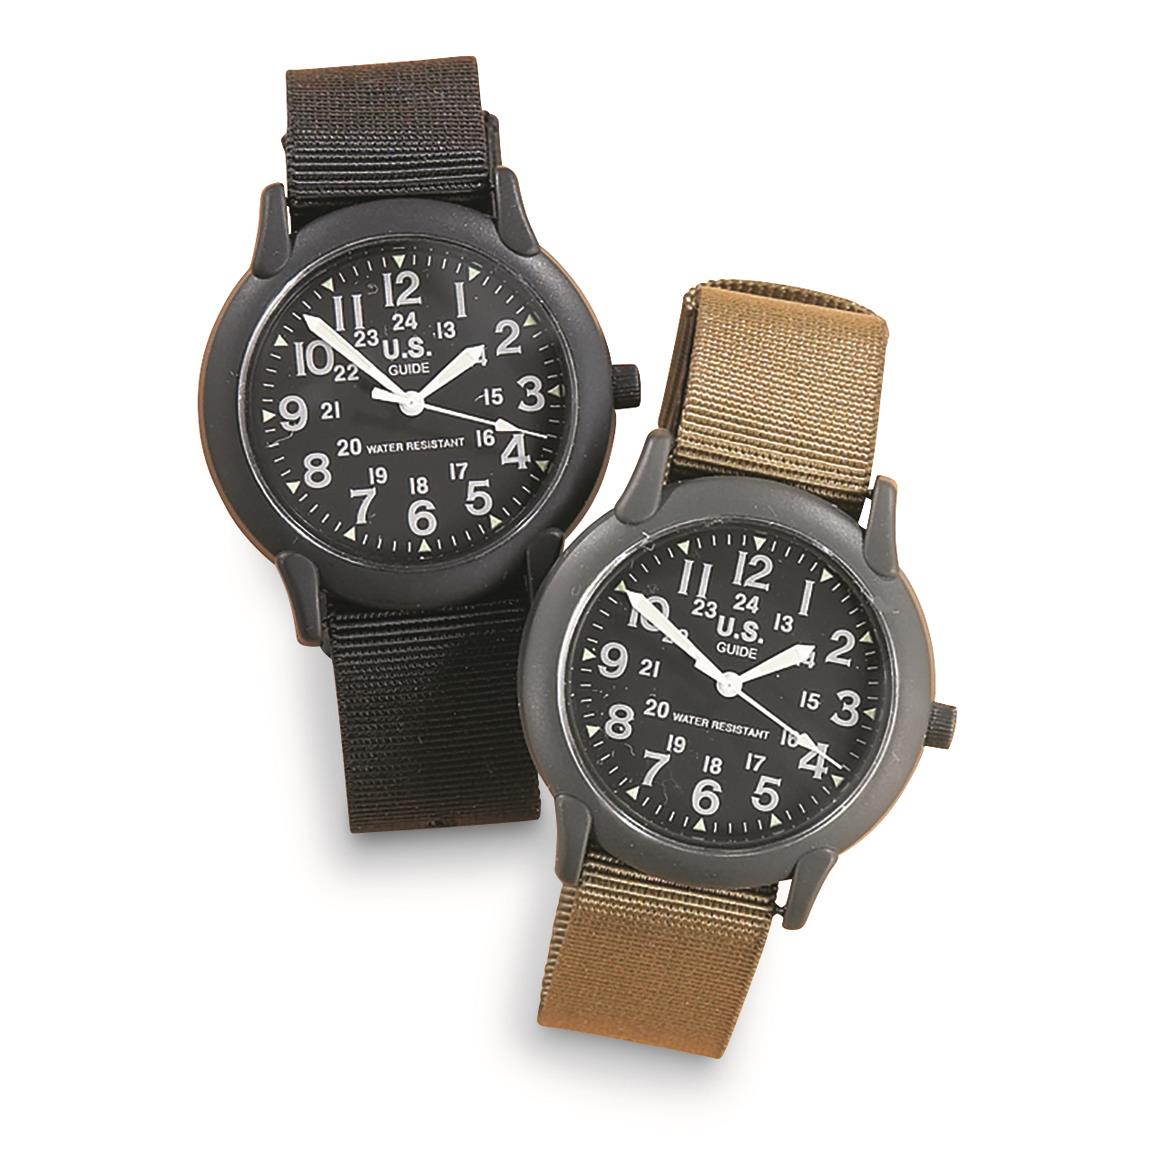 2 Military-style Army Watches, 1 Black and 1 Olive Drab